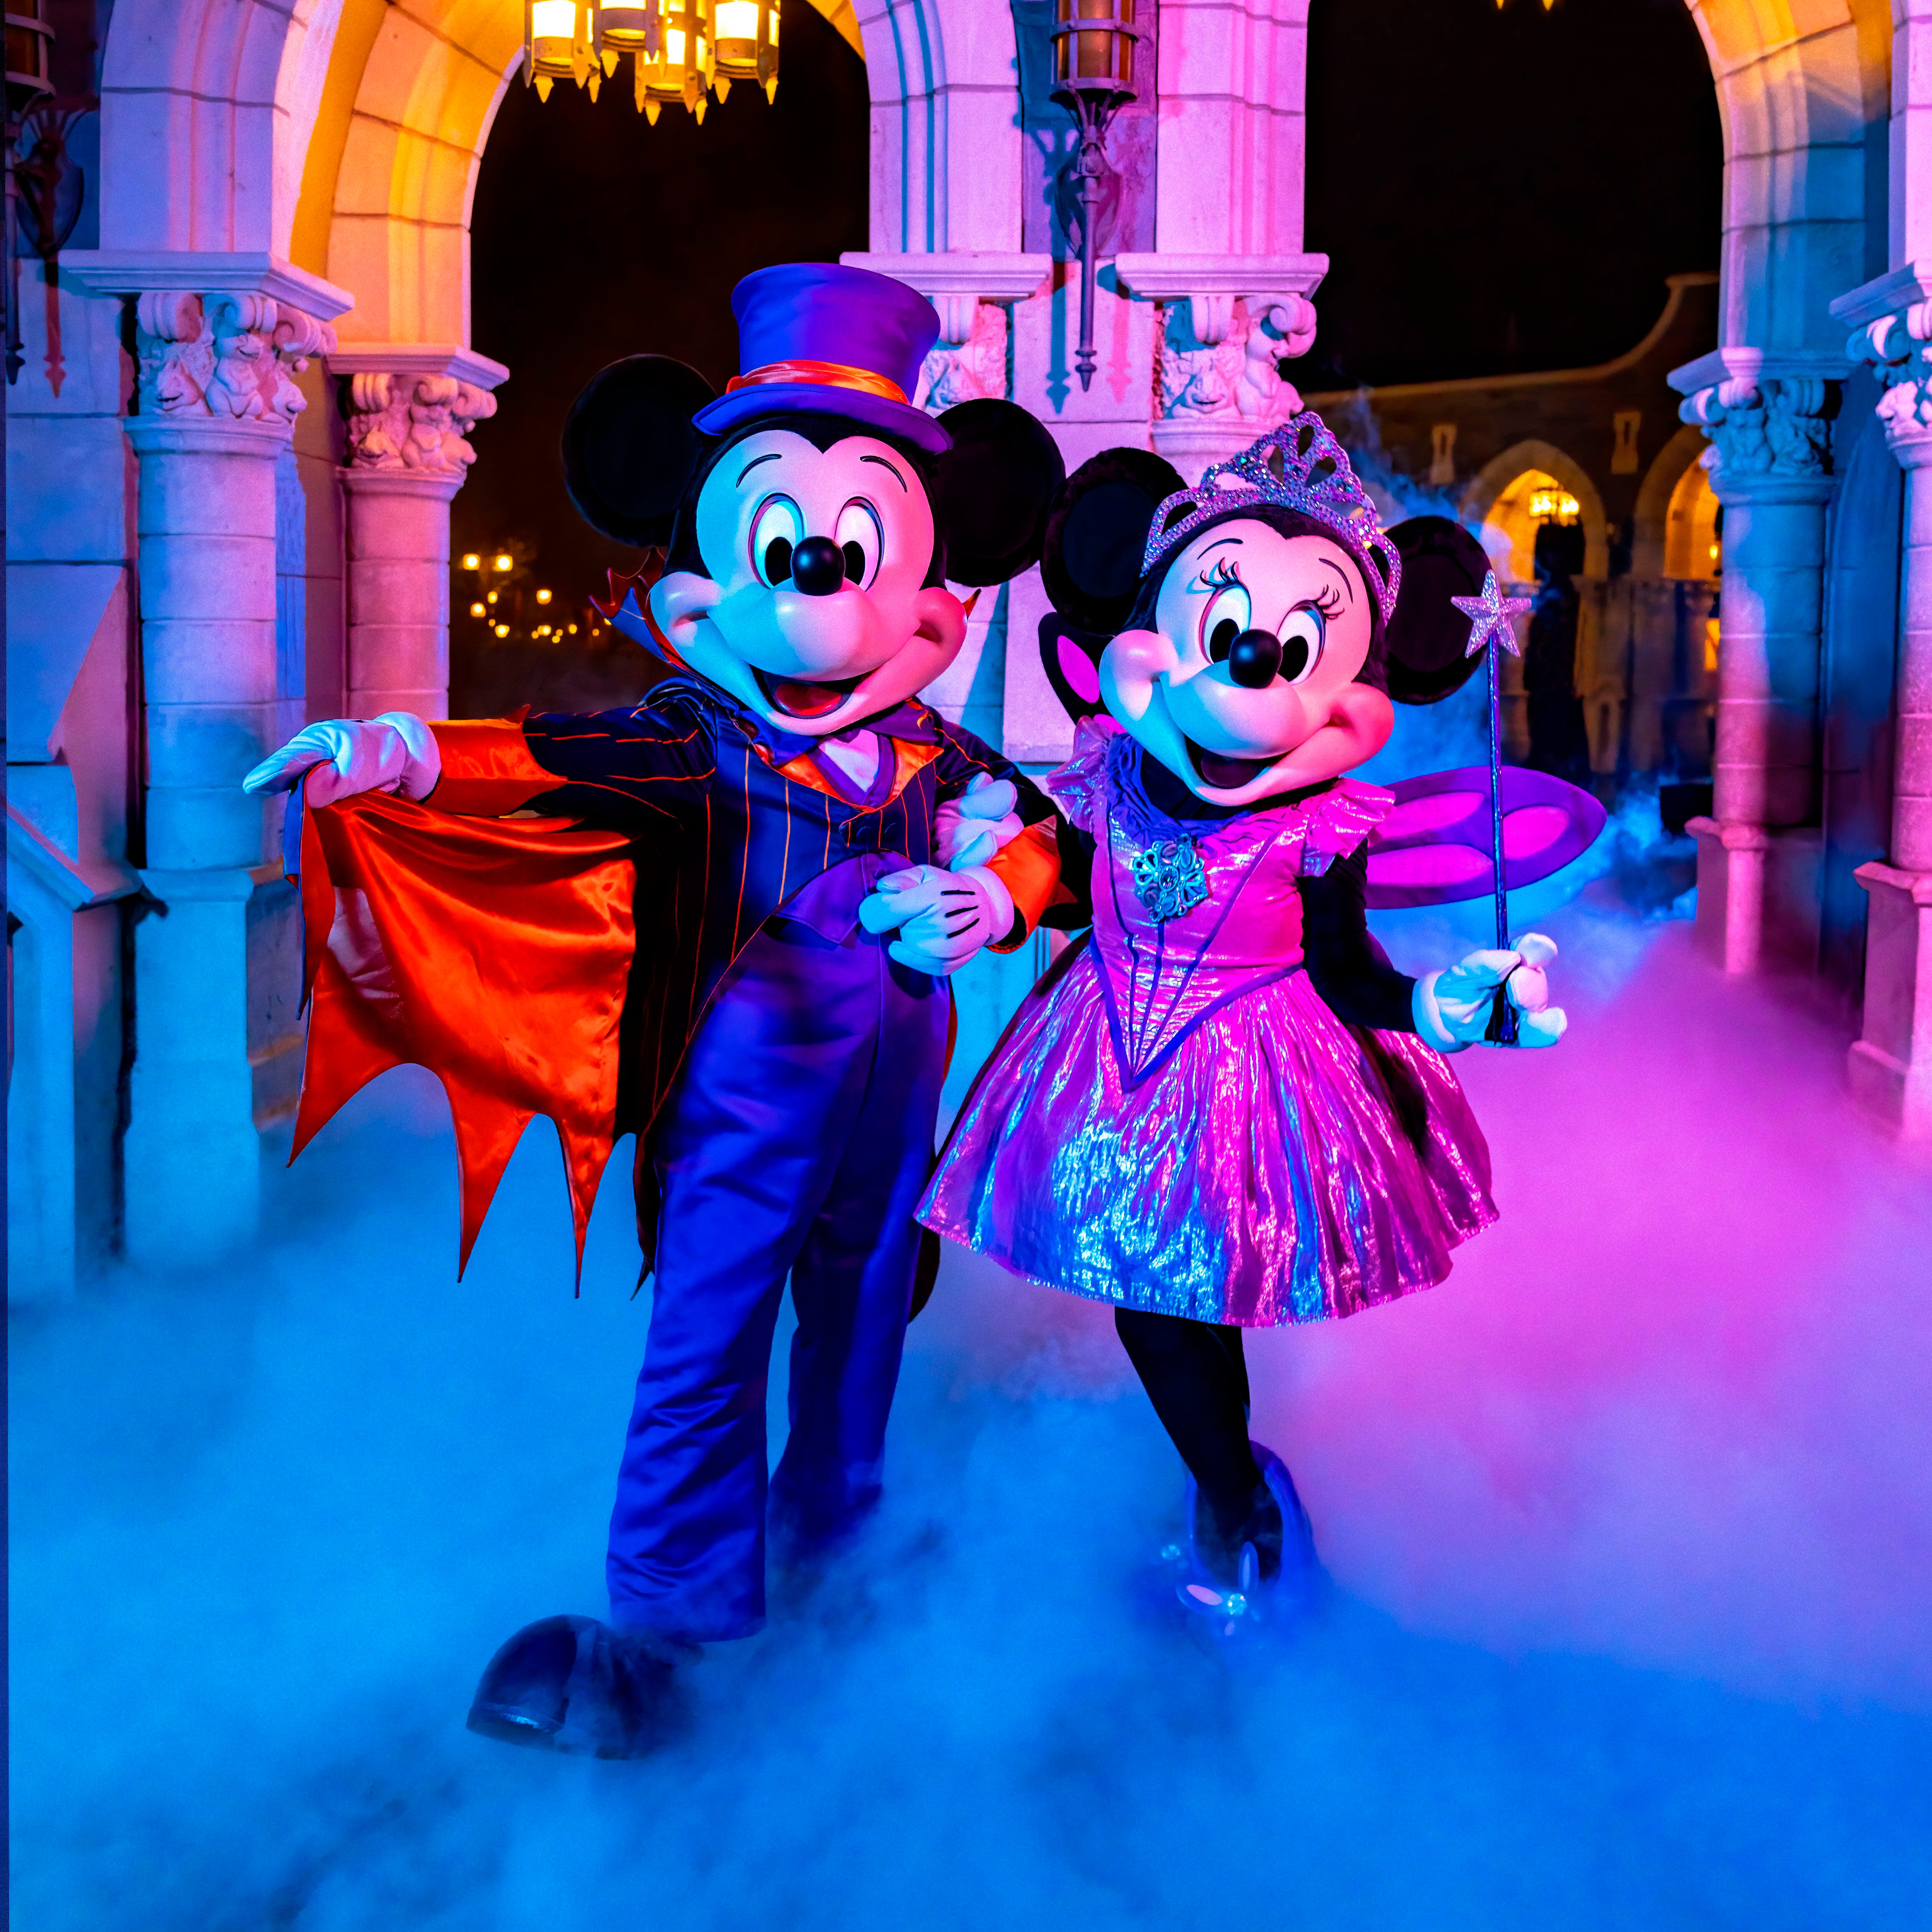 Mickey Mouse and Minnie Mouse are among the characters who dress up in costume for Mickey's Not-So-Scary Halloween Party,